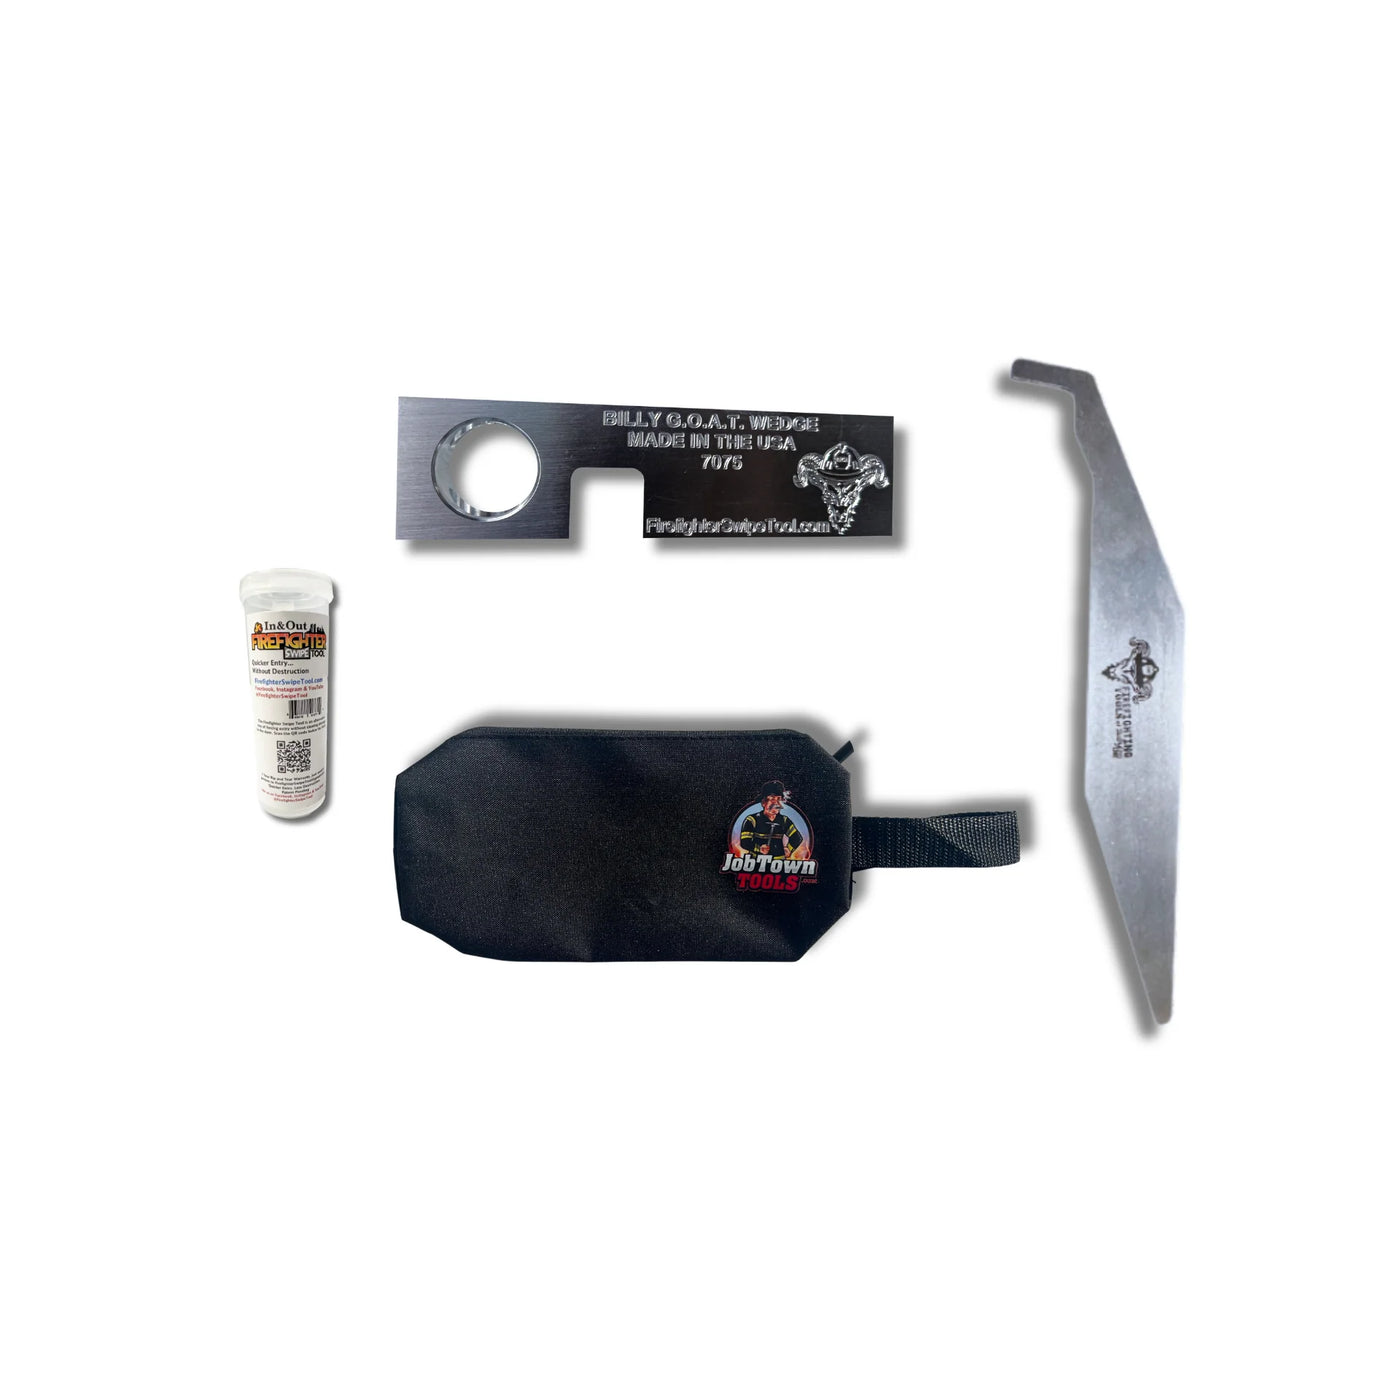 FDIC Personal Entry Assist Kit